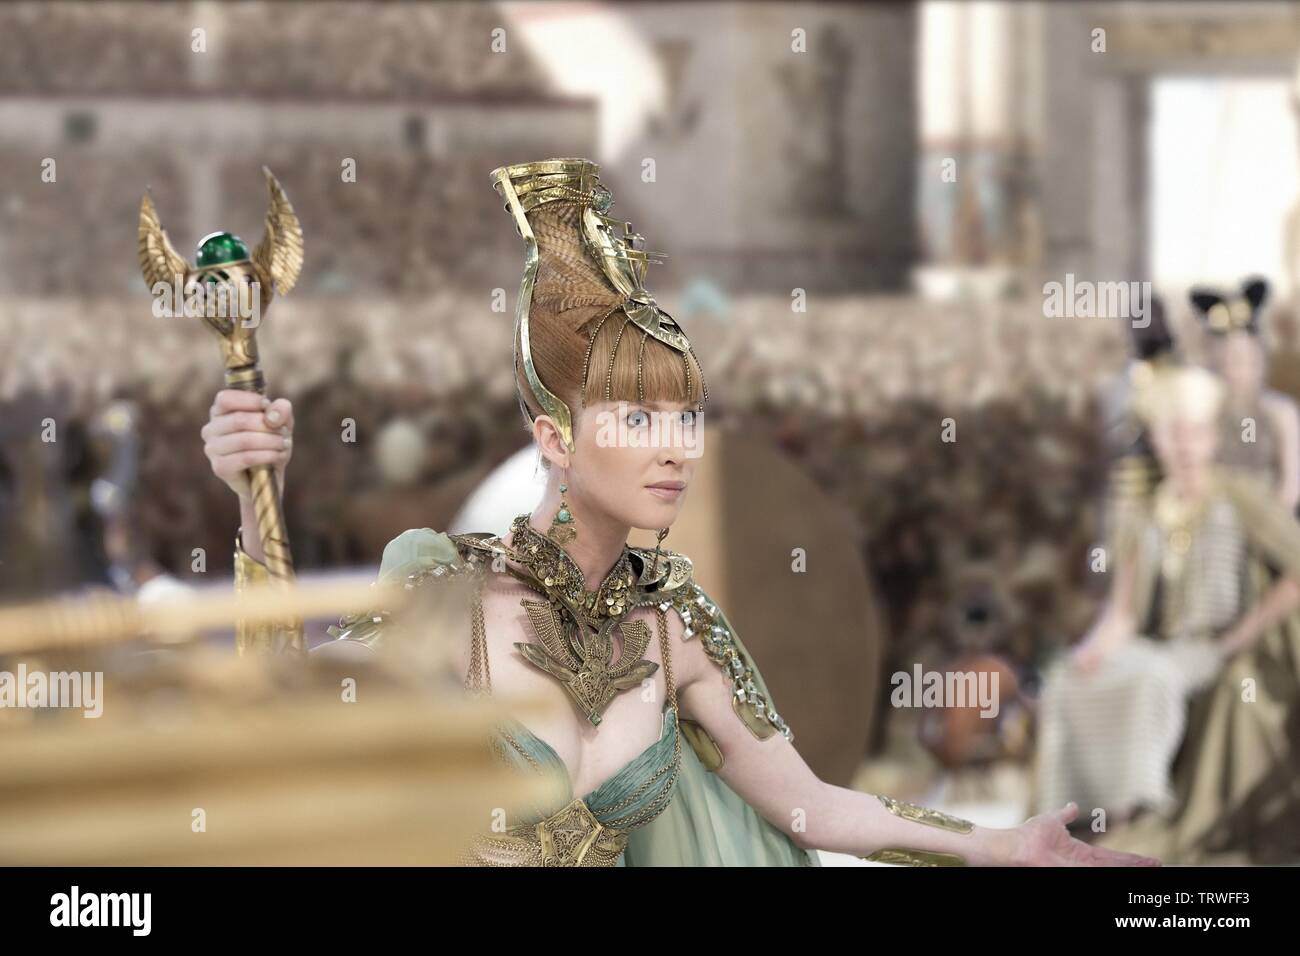 EMMA BOOTH in GODS OF EGYPT (2016). Copyright: Editorial use only. No merchandising or book covers. This is a publicly distributed handout. Access rights only, no license of copyright provided. Only to be reproduced in conjunction with promotion of this film. Credit: CONCORDE CLOCK CINEMA/SUMMIT ENT/THUNDER ROAD PICTURES / Album Stock Photo